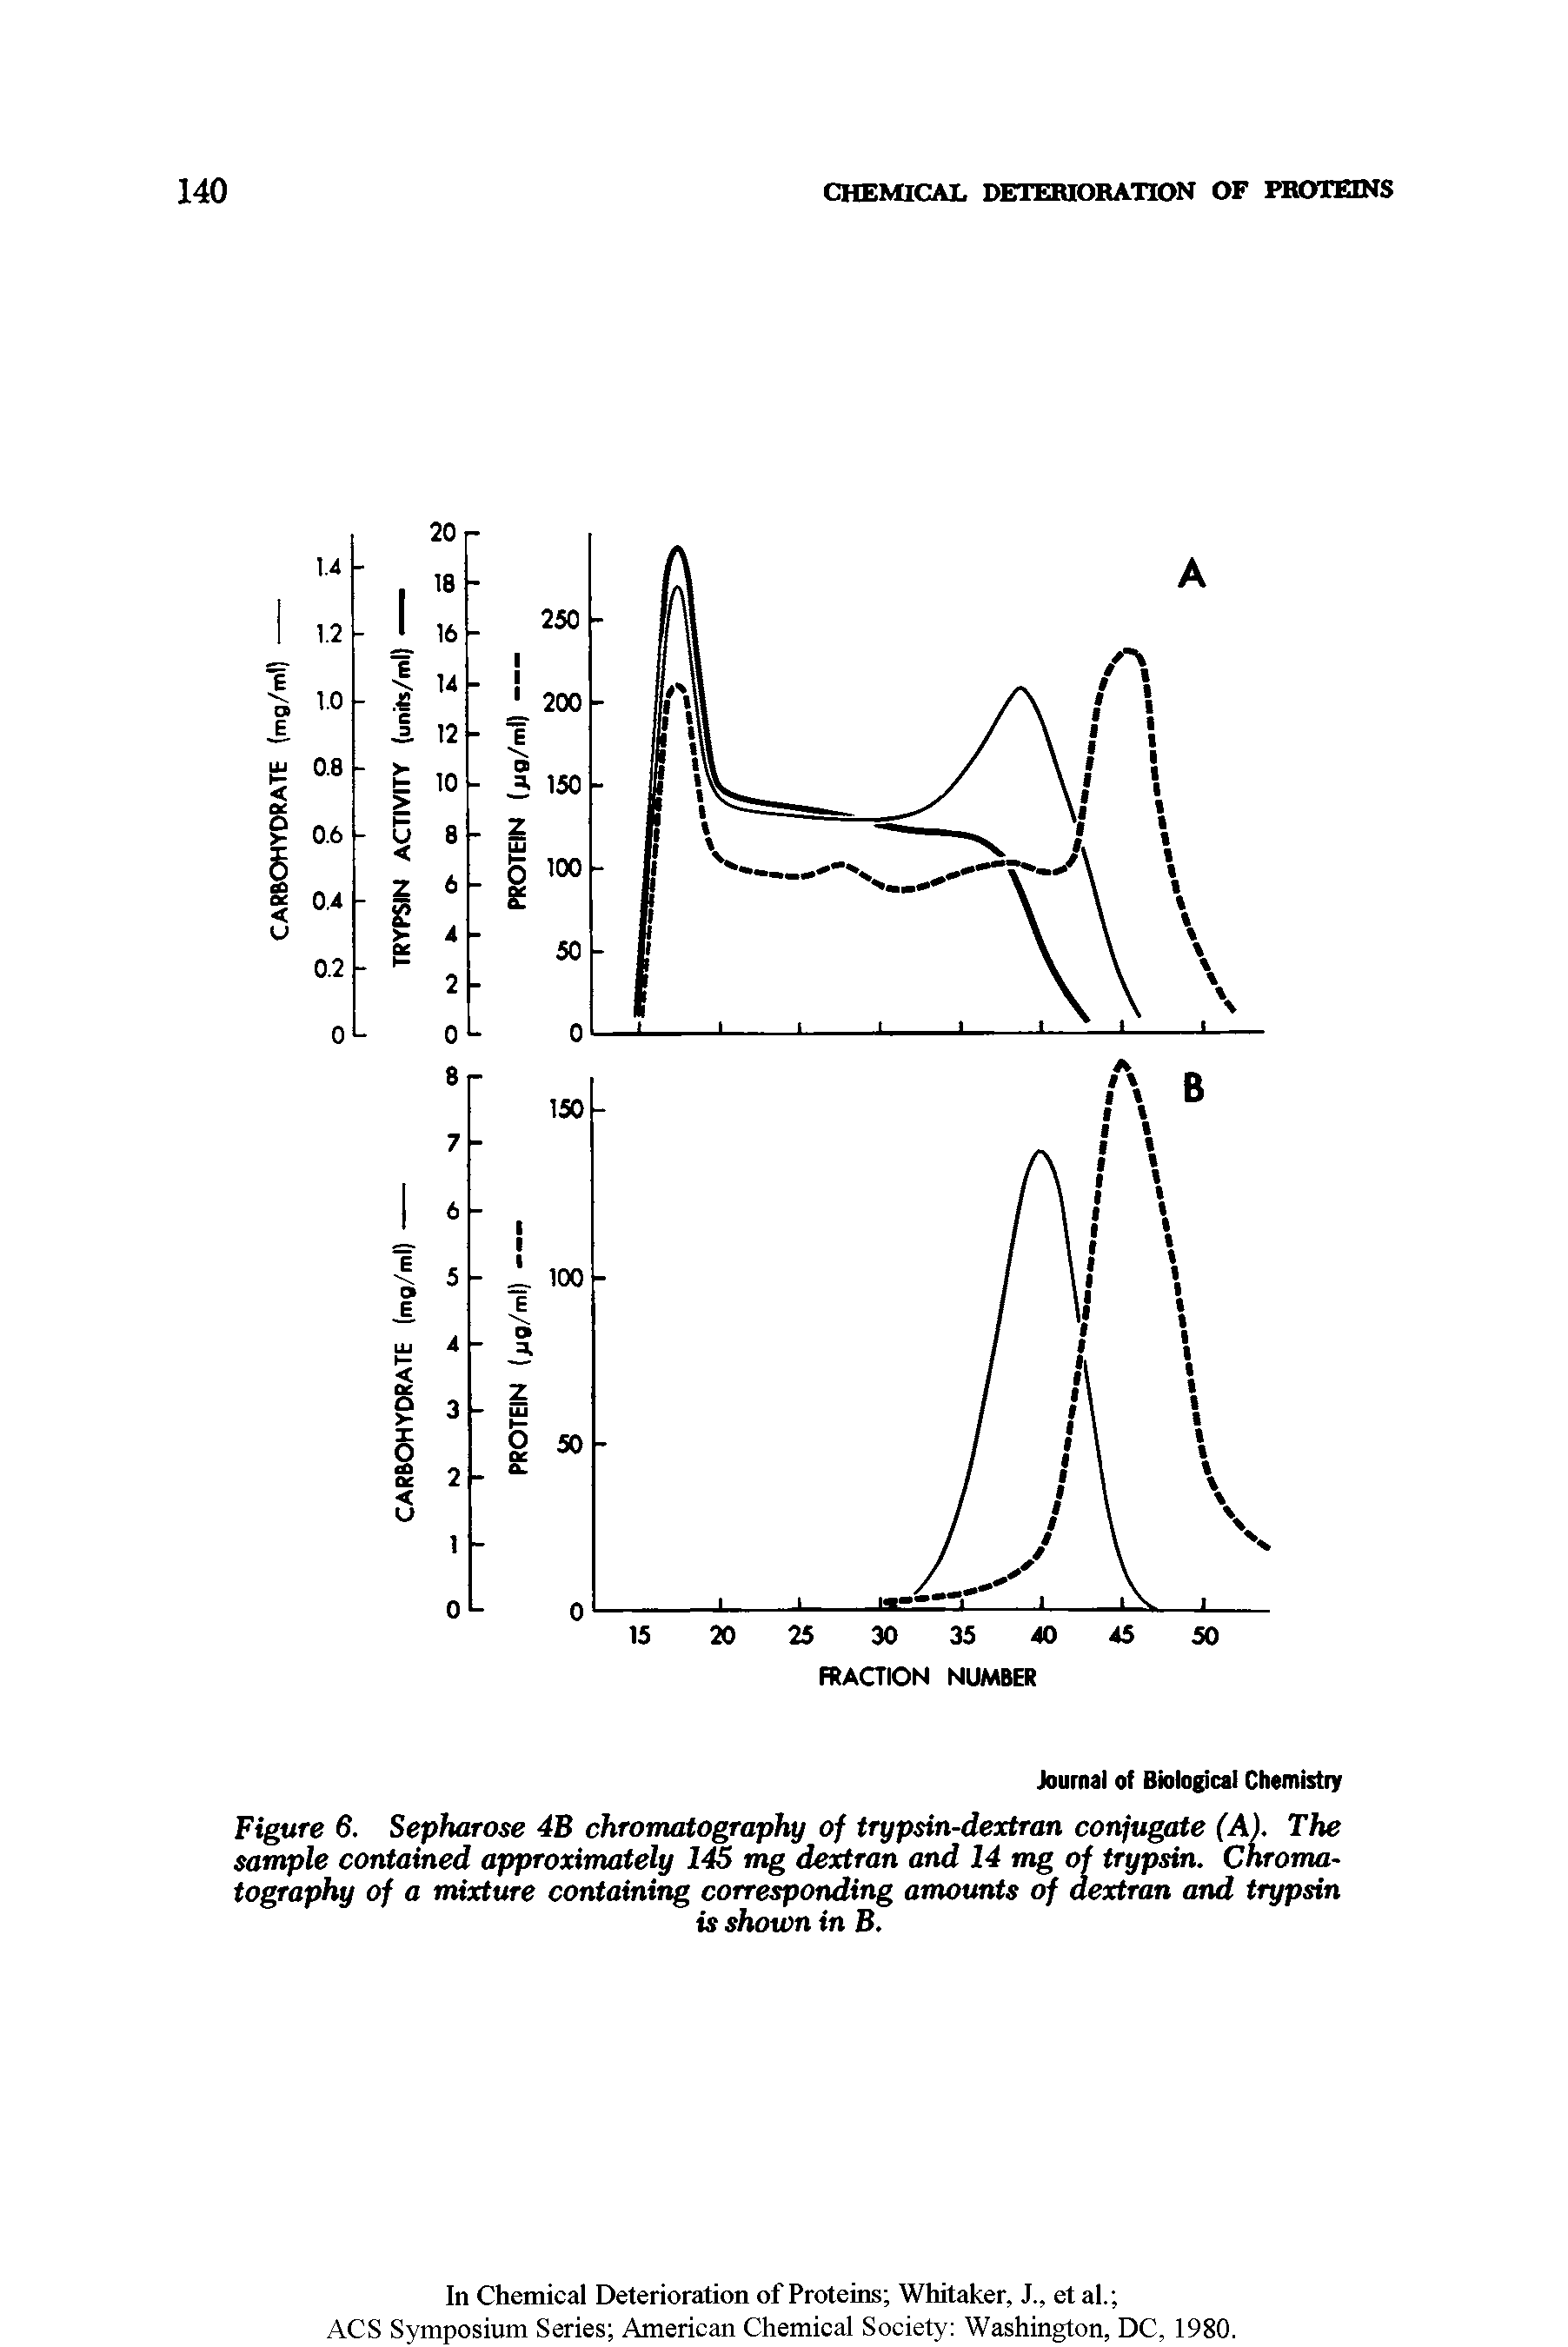 Figure 6. Sepharose 4B chromatography of trypsin-dextran conjugate (A). The sample contained approximately 145 mg dextran and 14 mg of trypsin. Chromatography of a mixture containing corresponding amounts of dextran and trypsin...